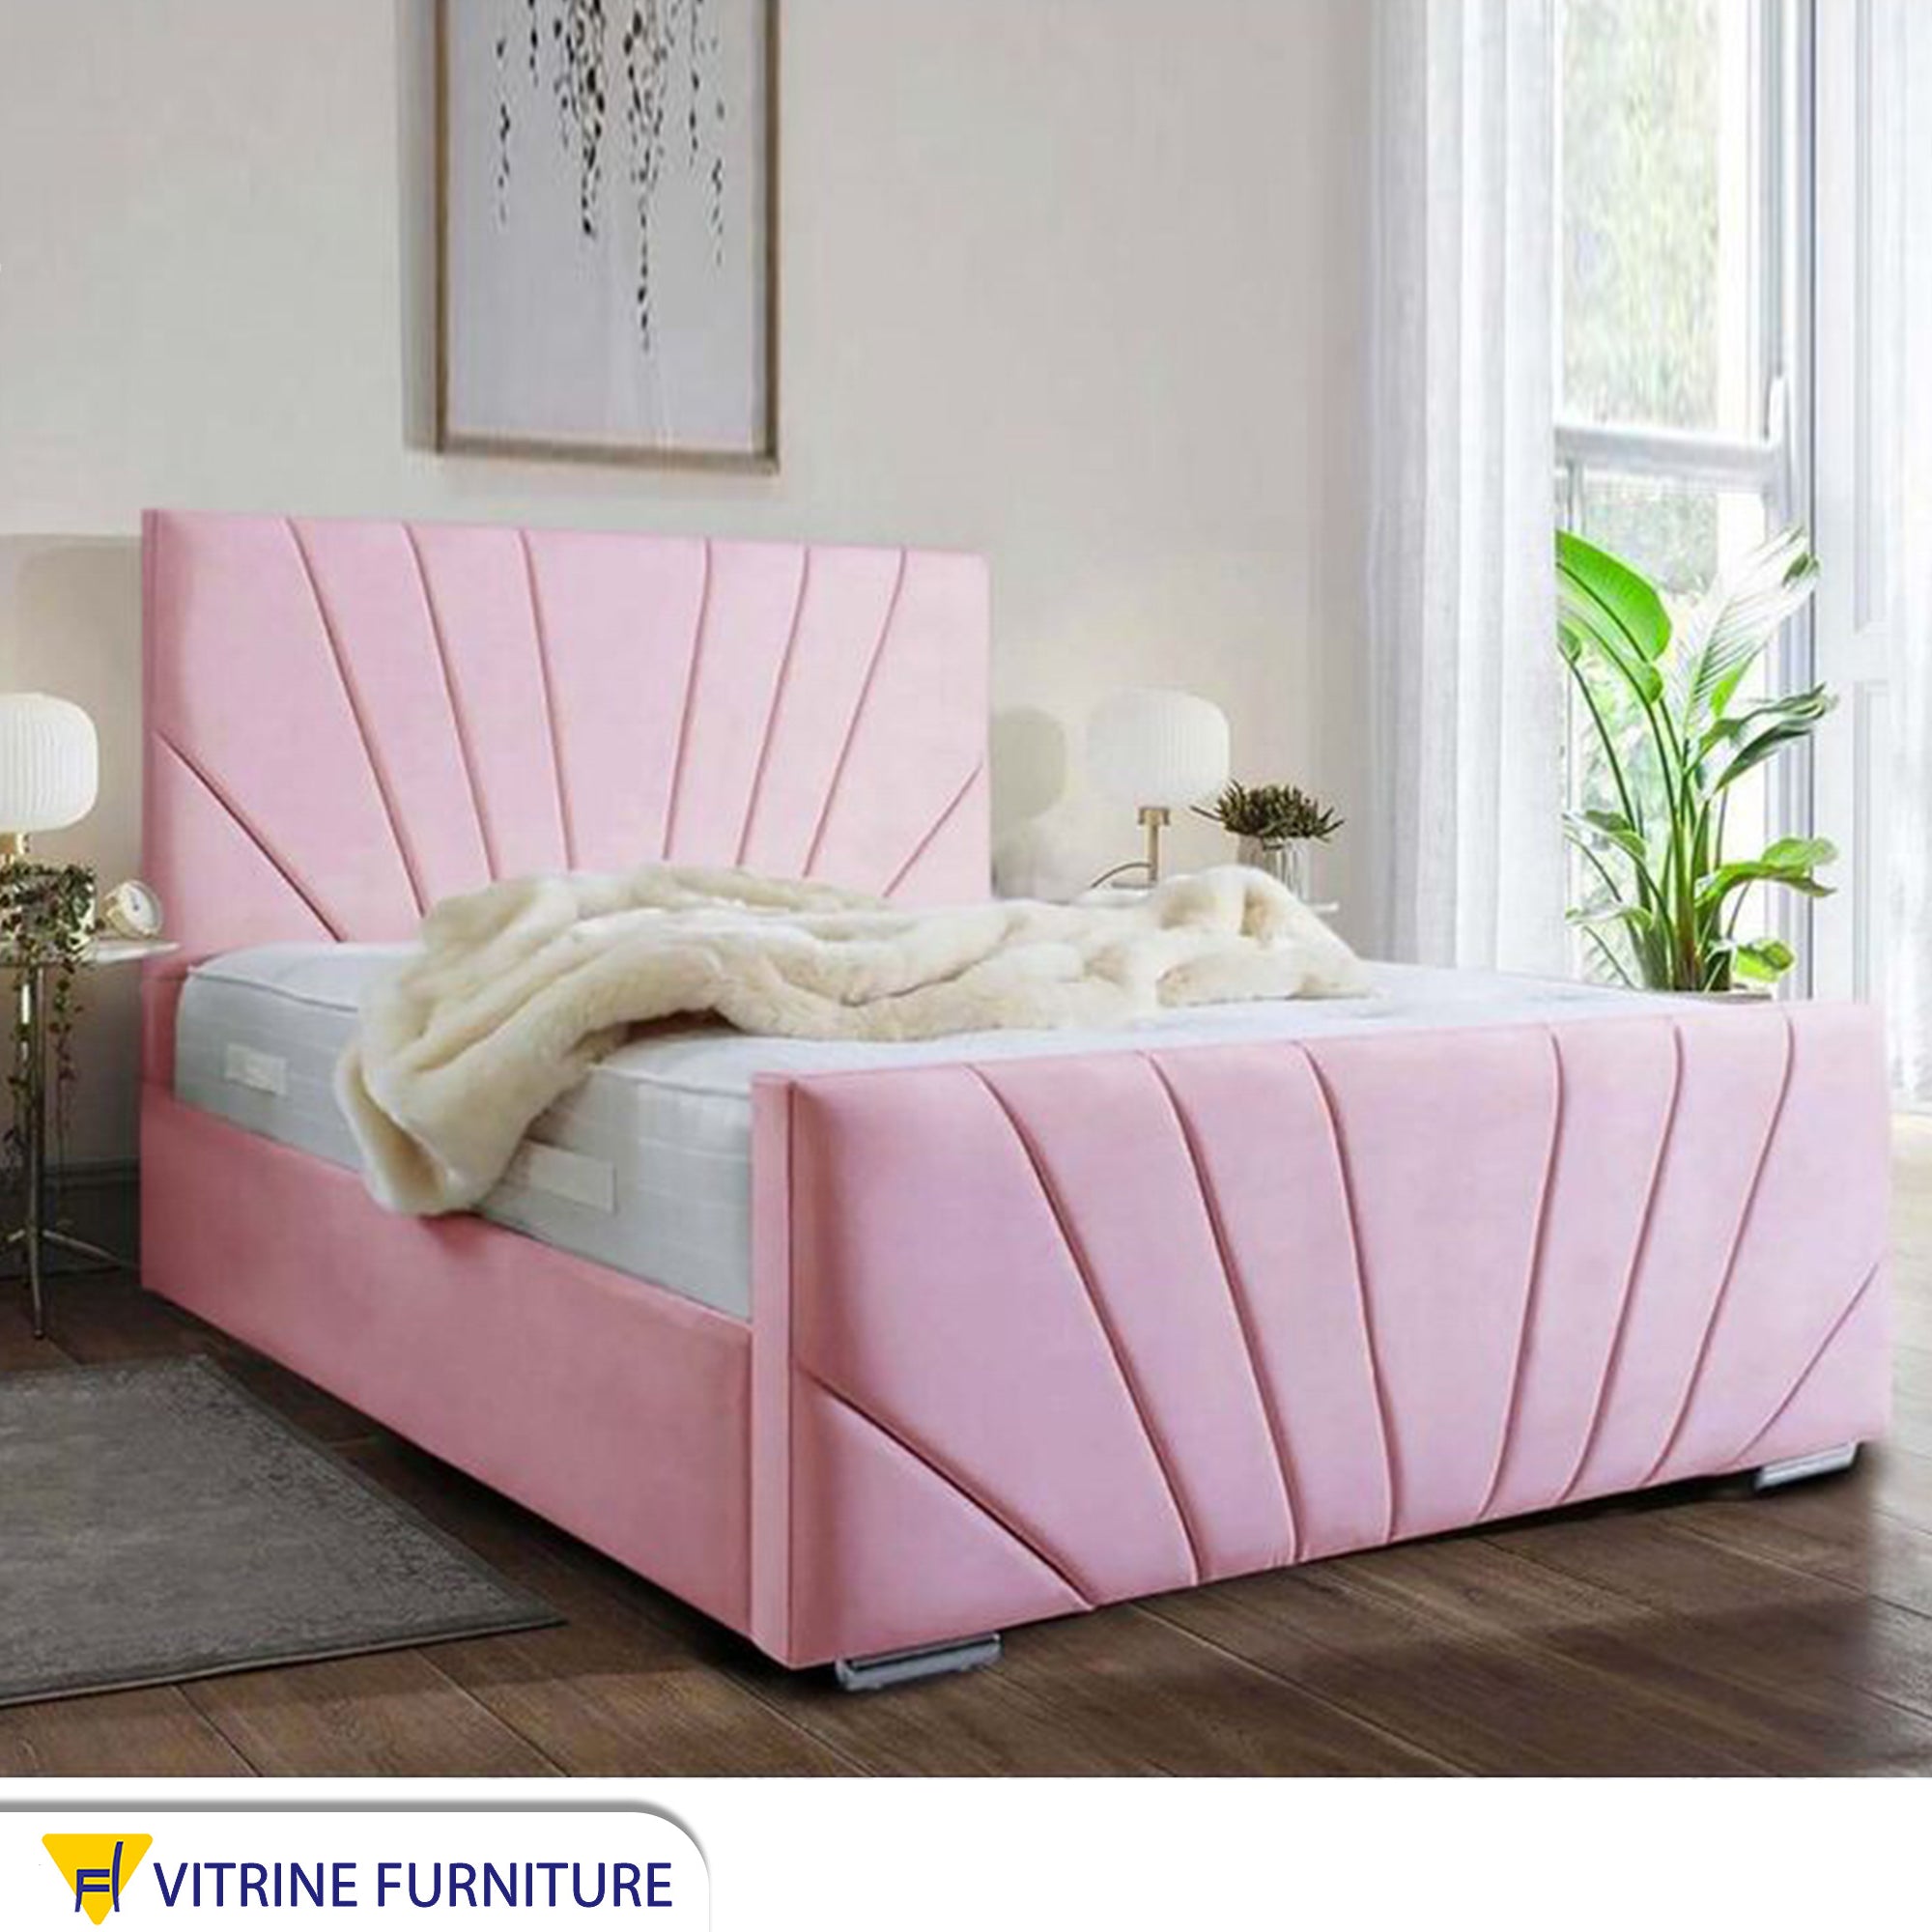 Pink bed with luxurious design